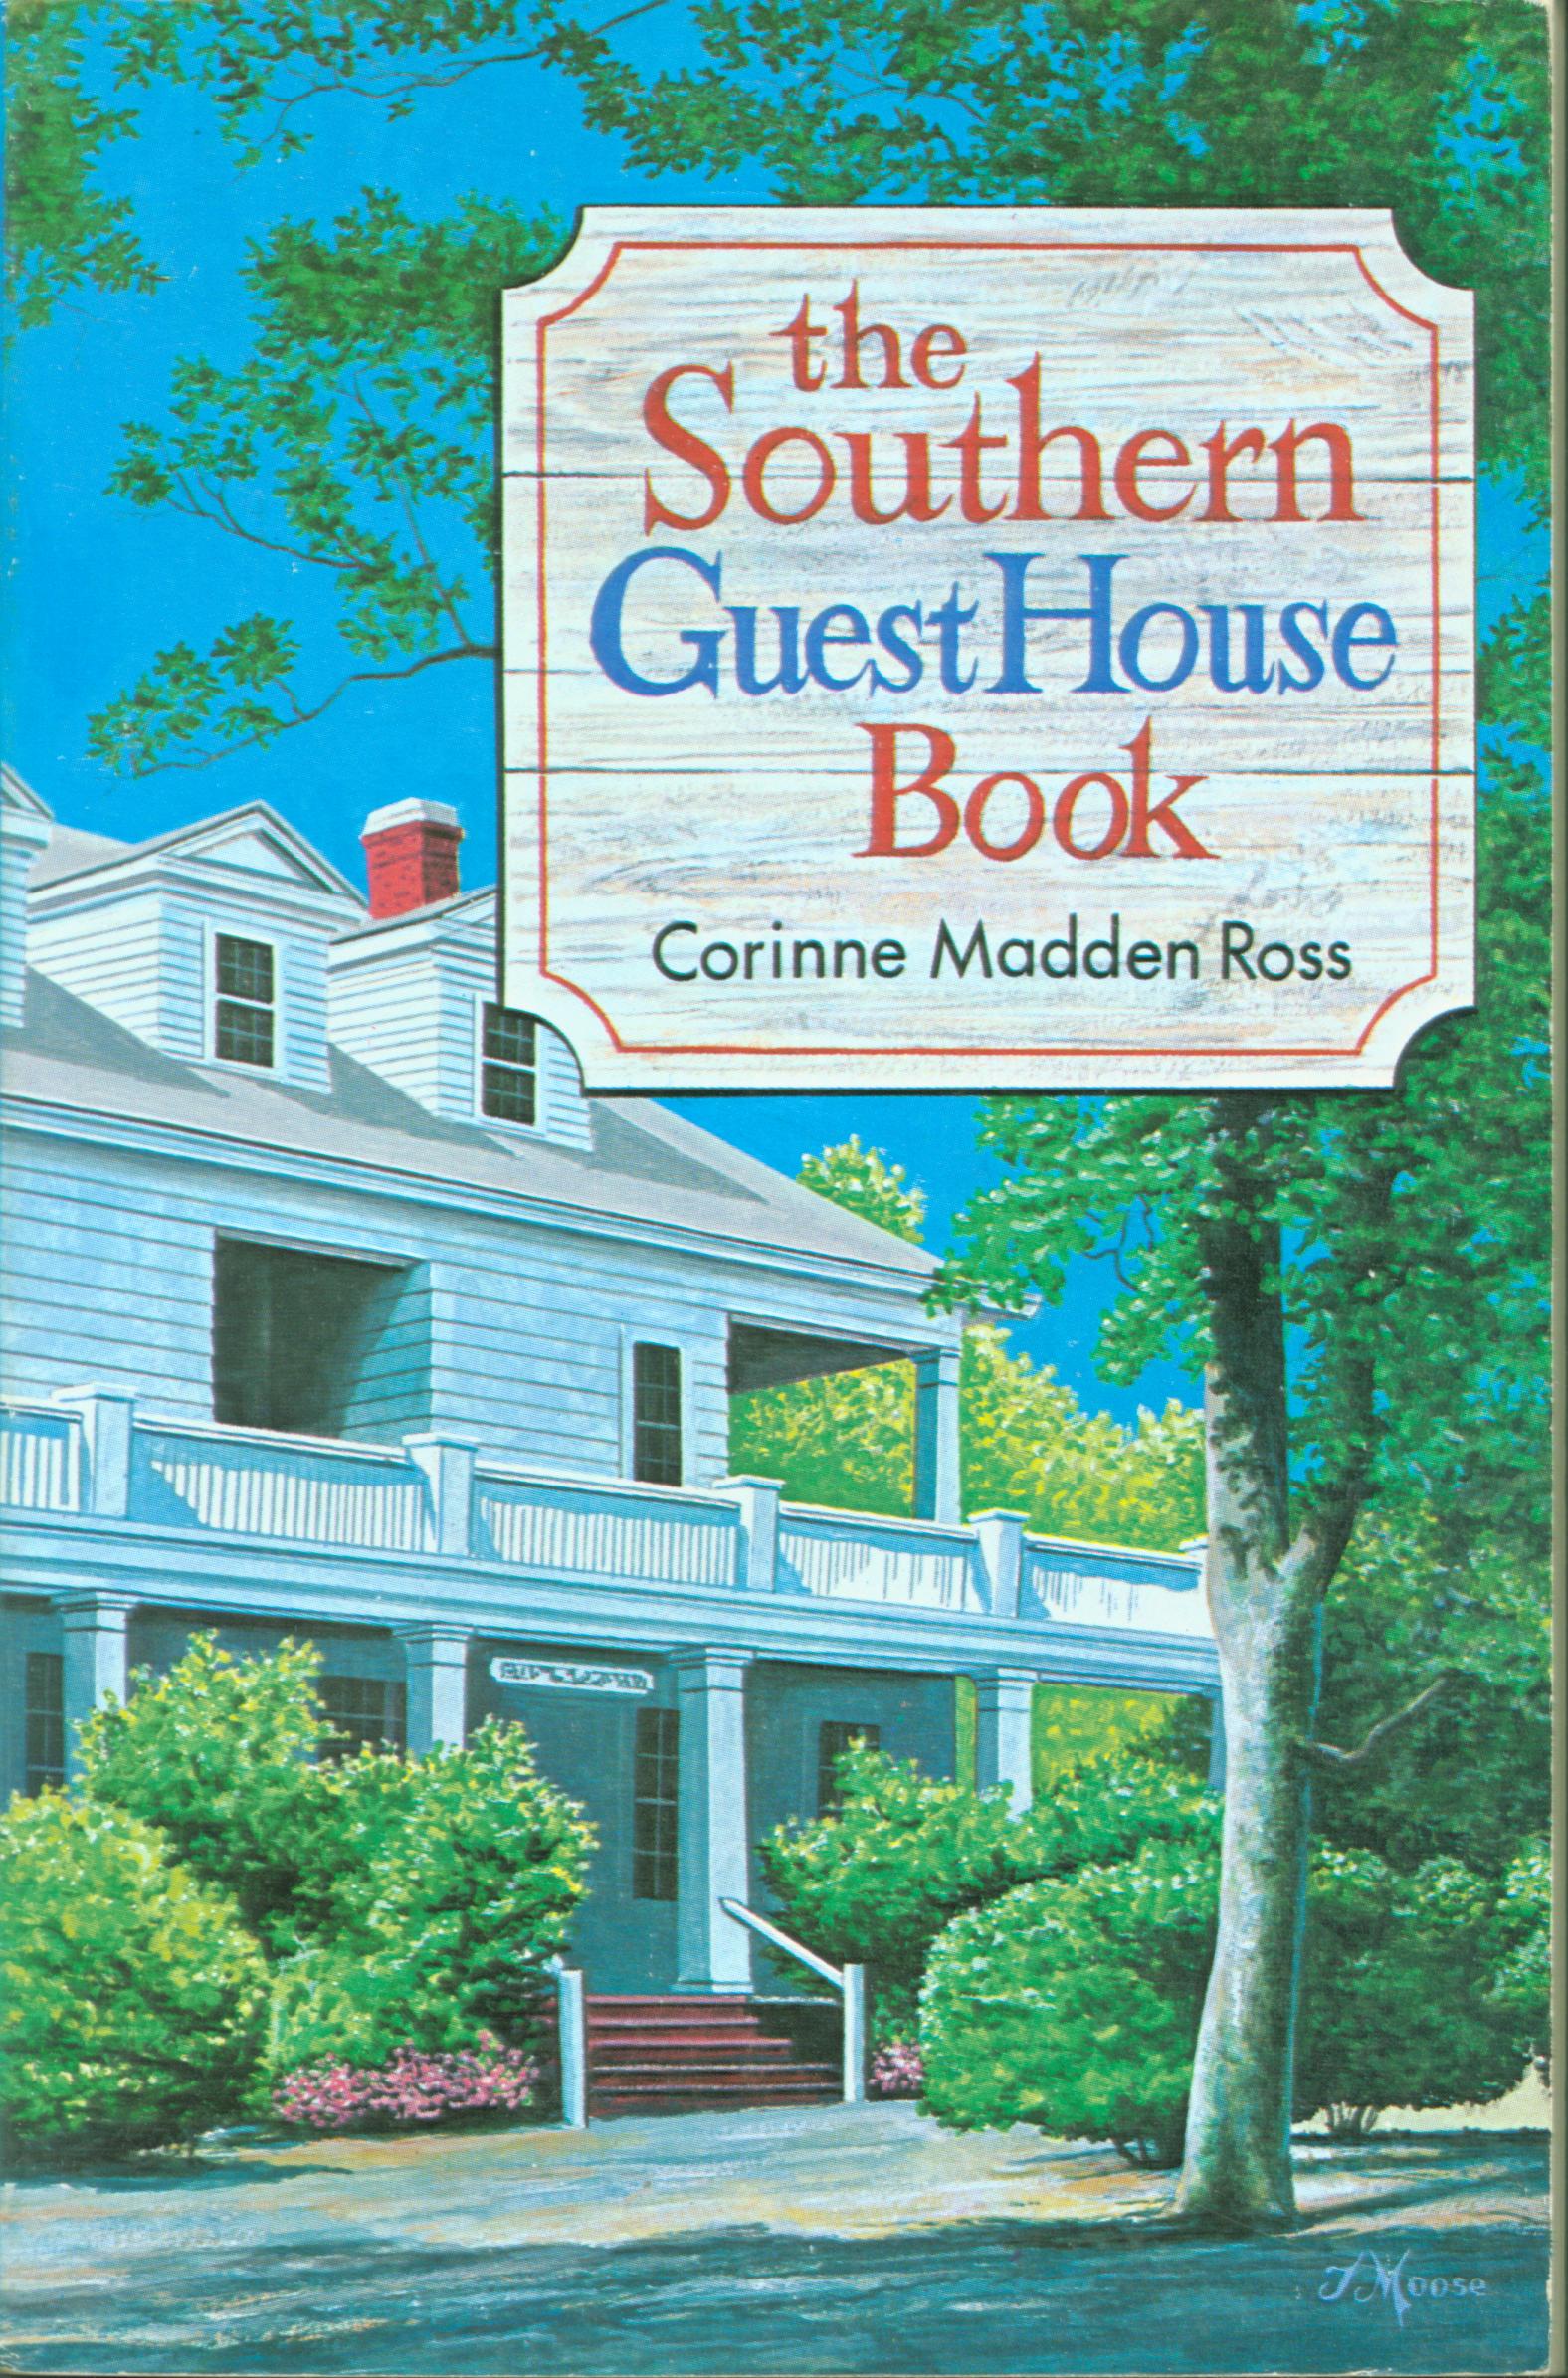 THE SOUTHERN GUEST HOUSE BOOK. 